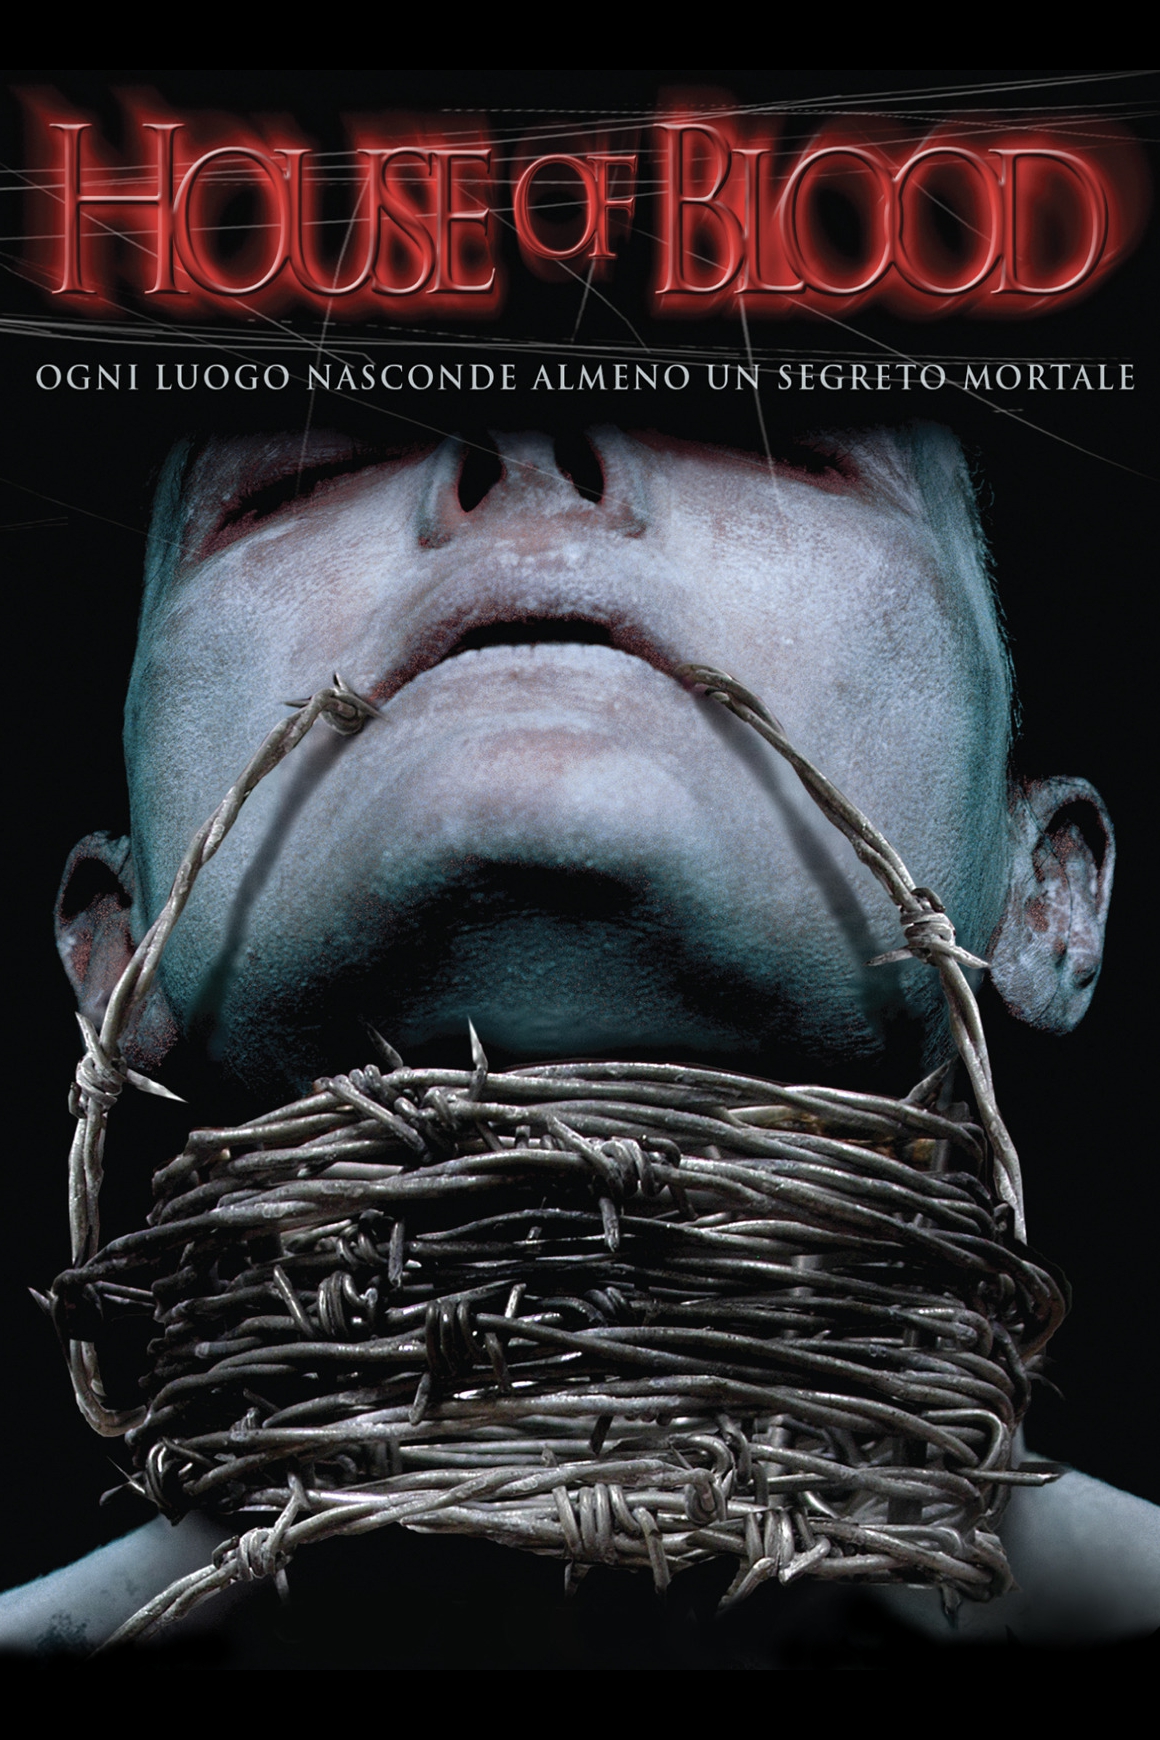 House of blood (2007)